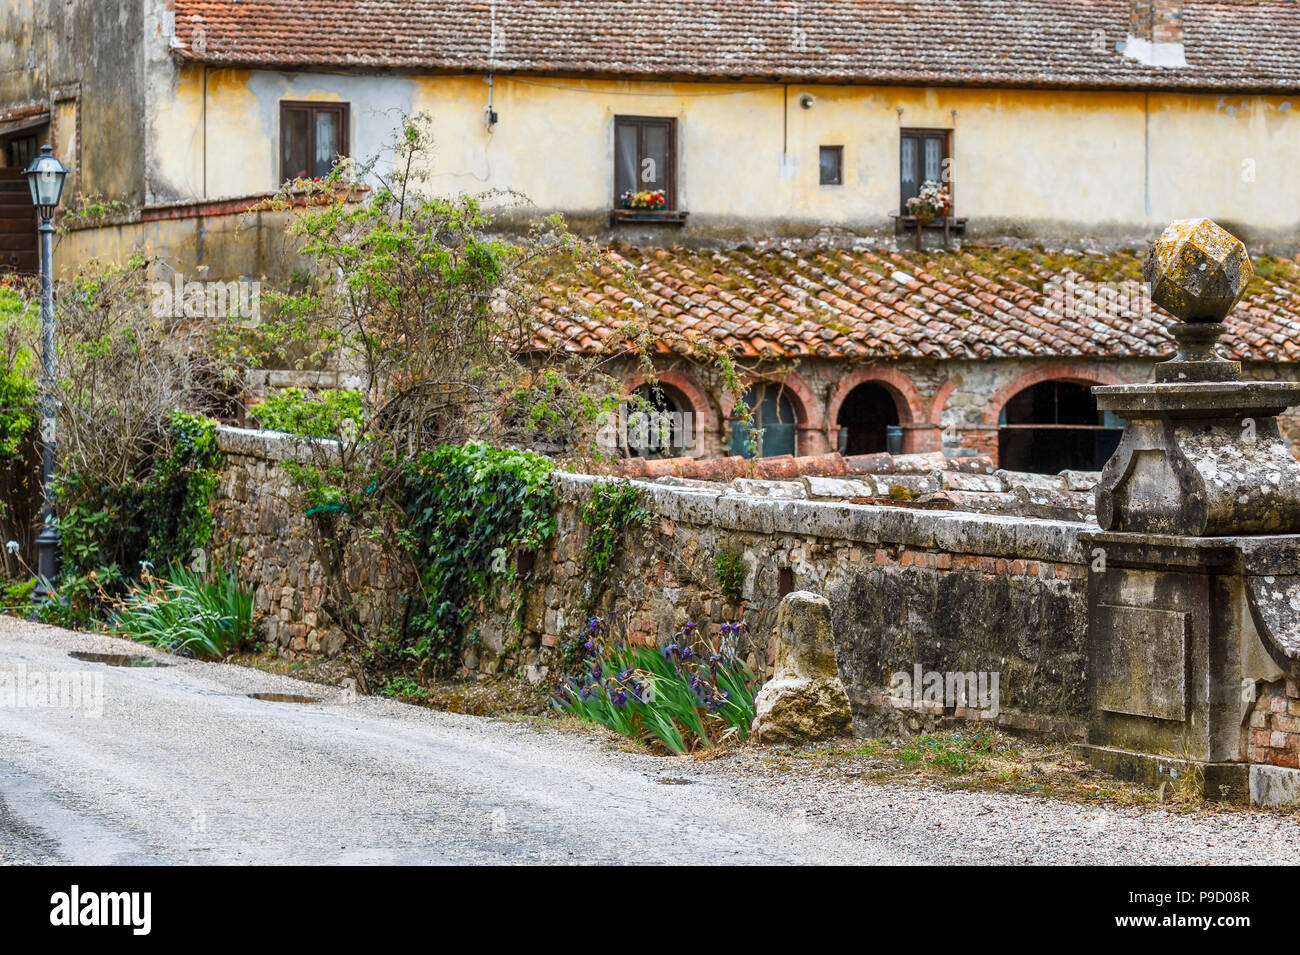 Italian villa on a road in the countryside Stock Photo